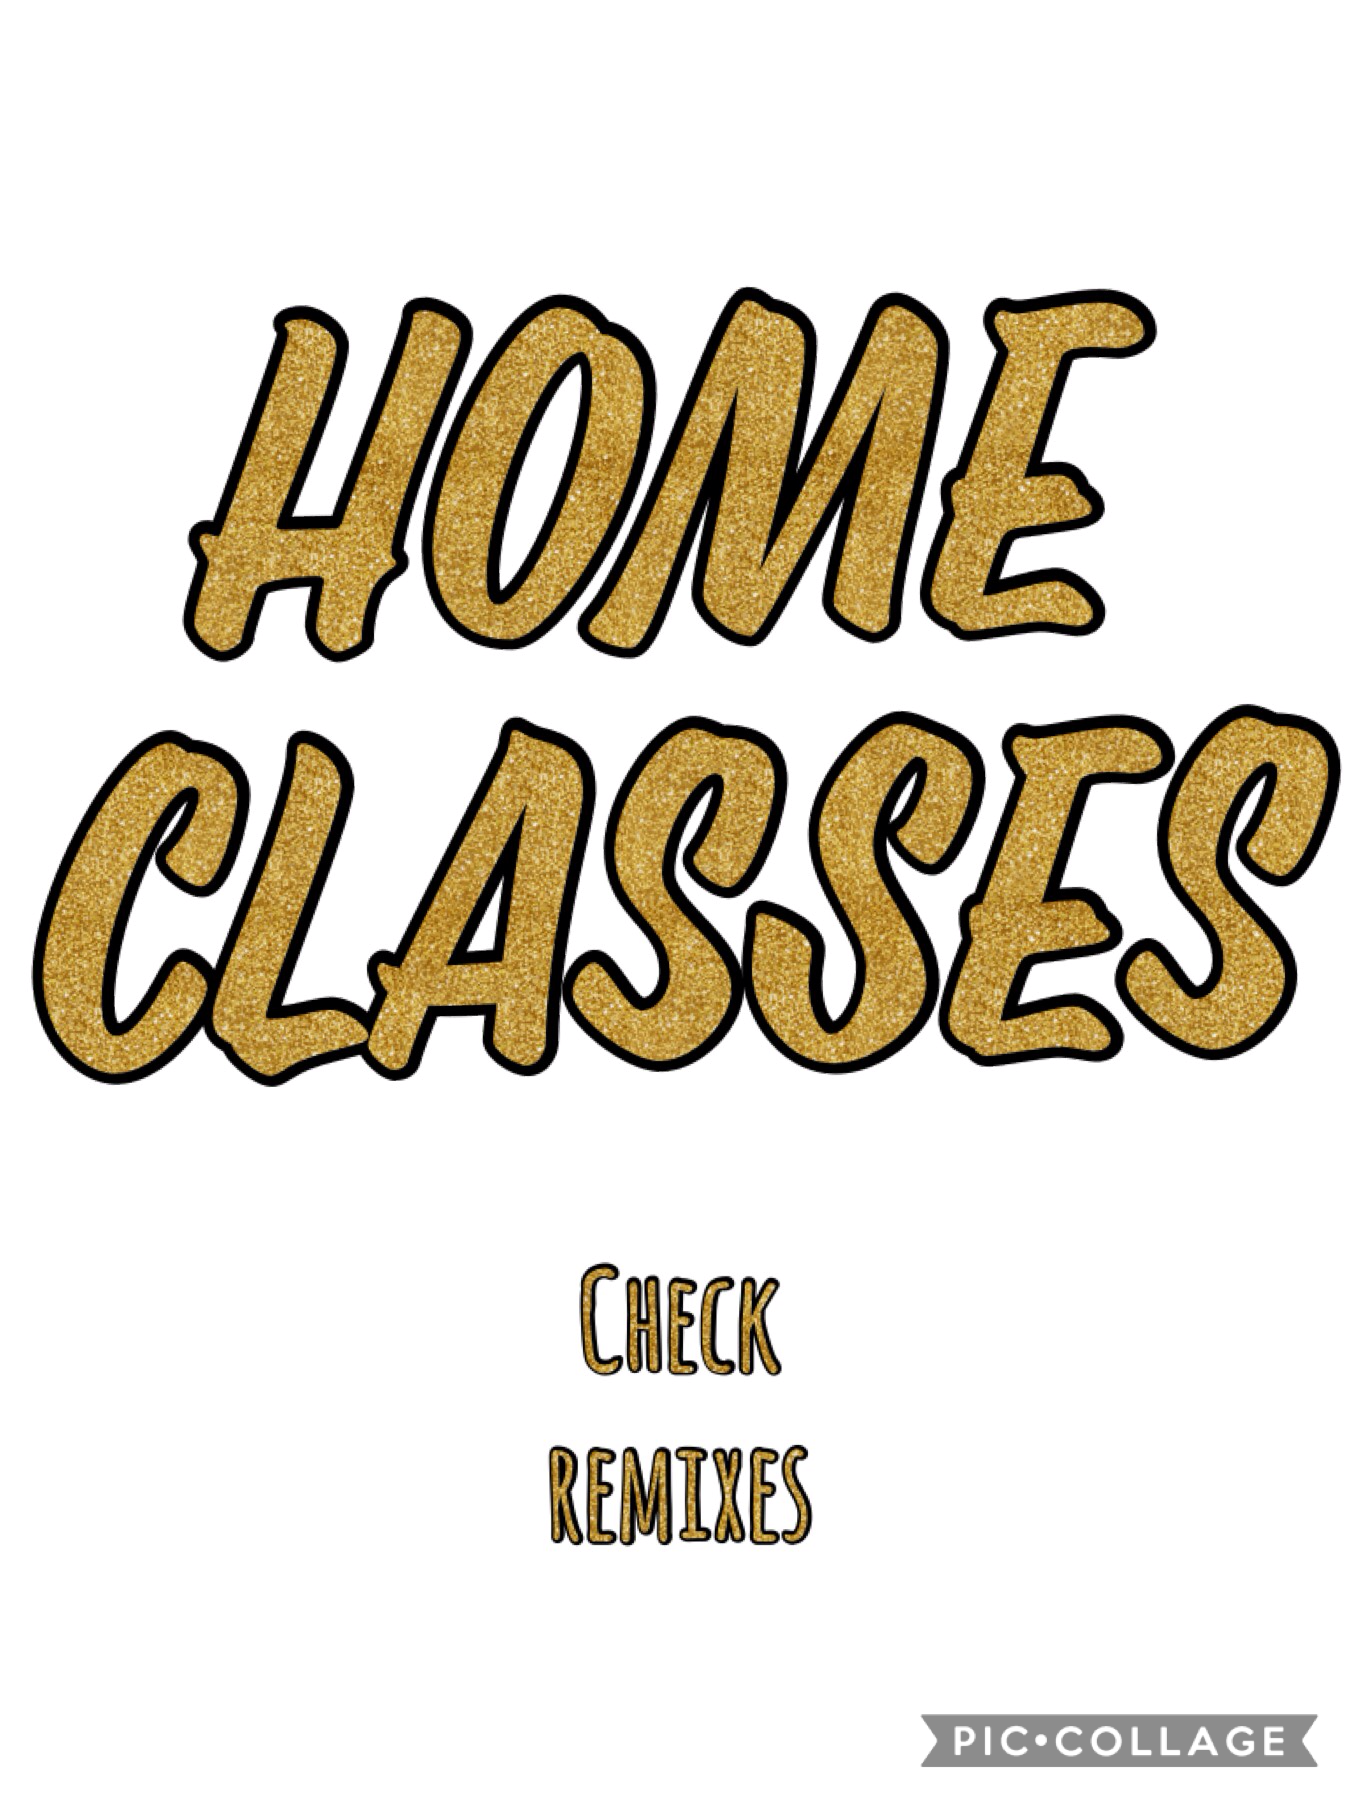 Check remixes to see your home class.  There are six classes total!